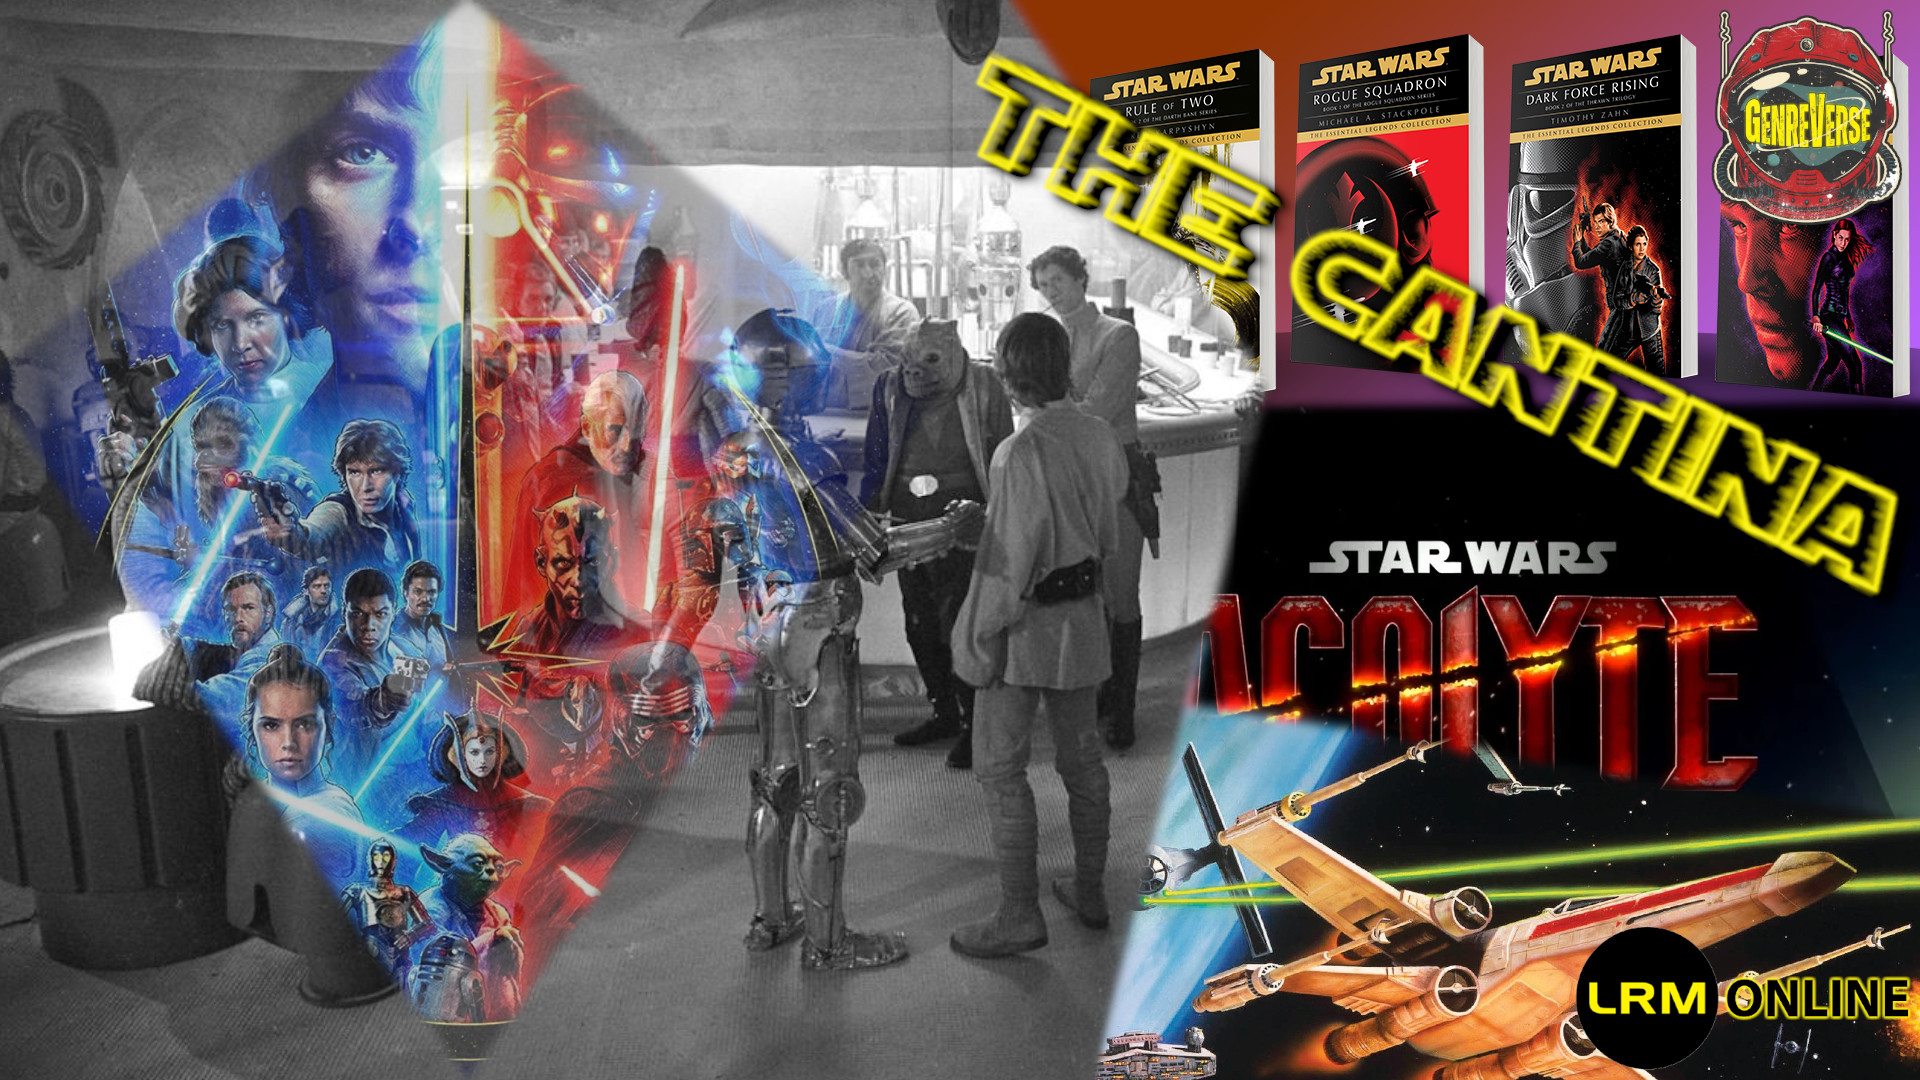 The Acolyte Showrunner Gives Us Some Writer Worry, Rogue Squadron Cover Disappoints, & Star Wars EU (Legends) Phase 2 Mara Jade Theories | The Cantina Podcast